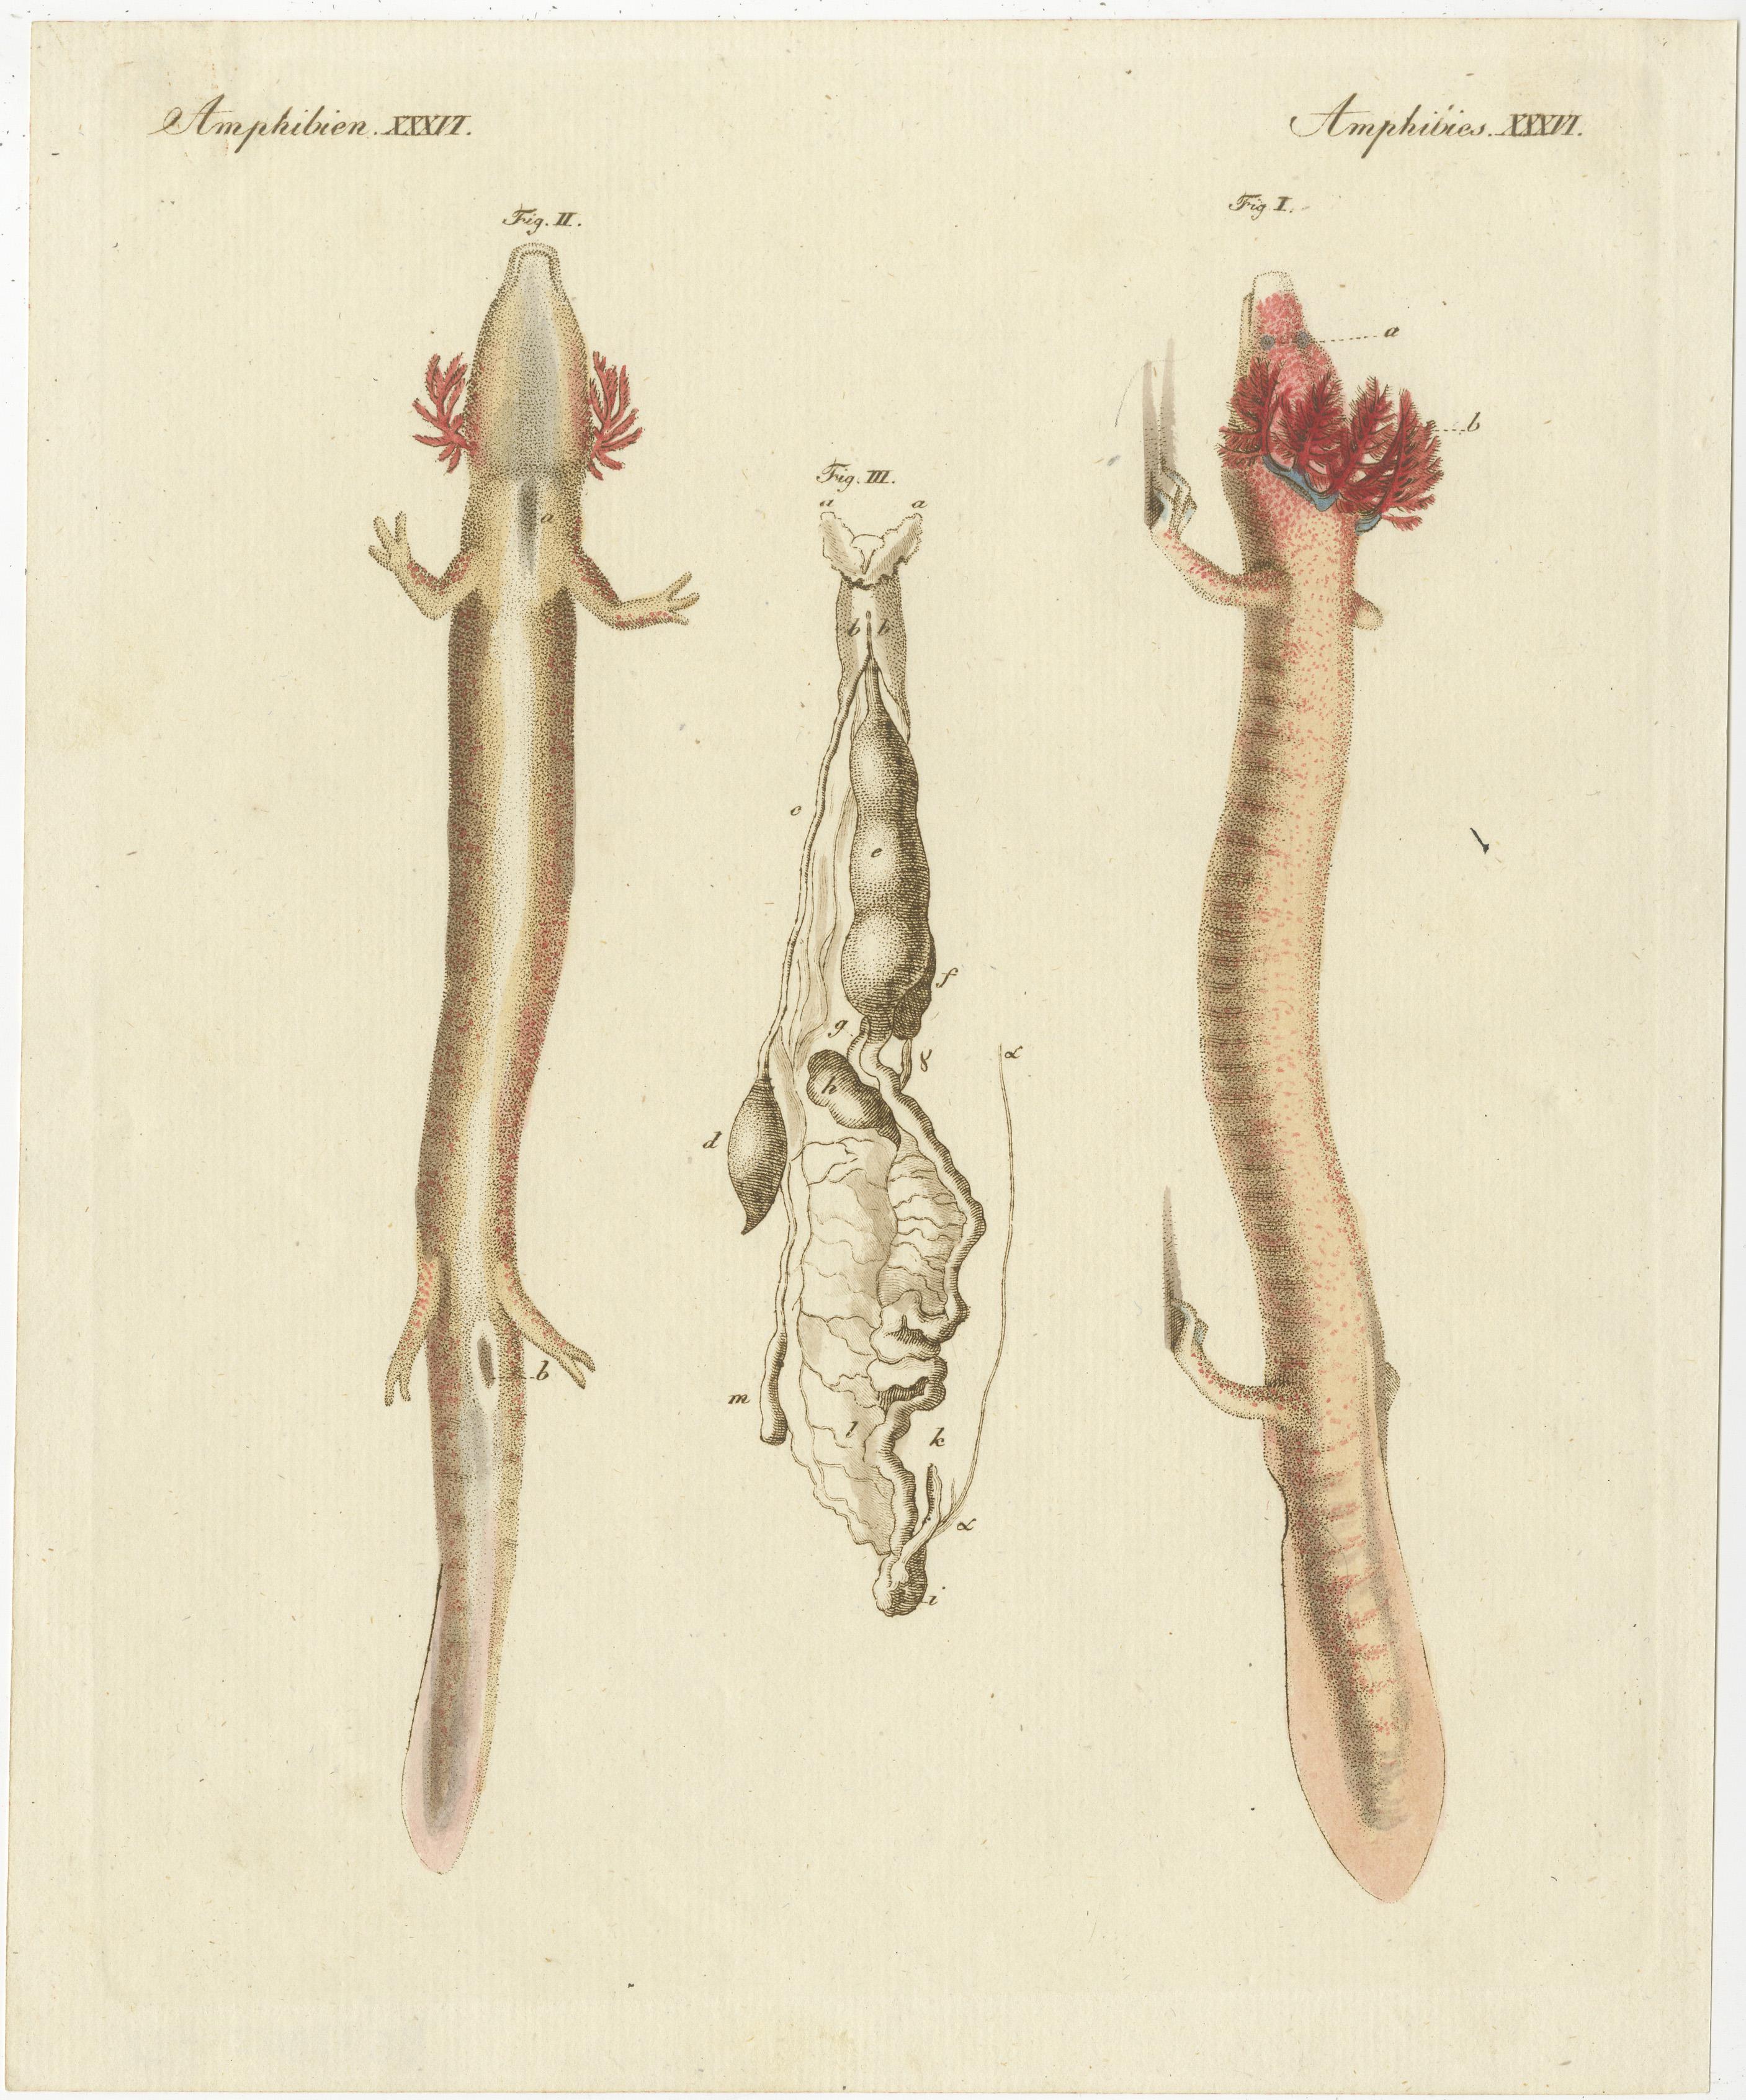 Original antique print of the olm or proteus (Proteus anguinus) is an aquatic salamander in the family Proteidae, the only exclusively cave-dwelling chordate species found in Europe. This print originates from 'Bilderbuch fur Kinder' by F.J.